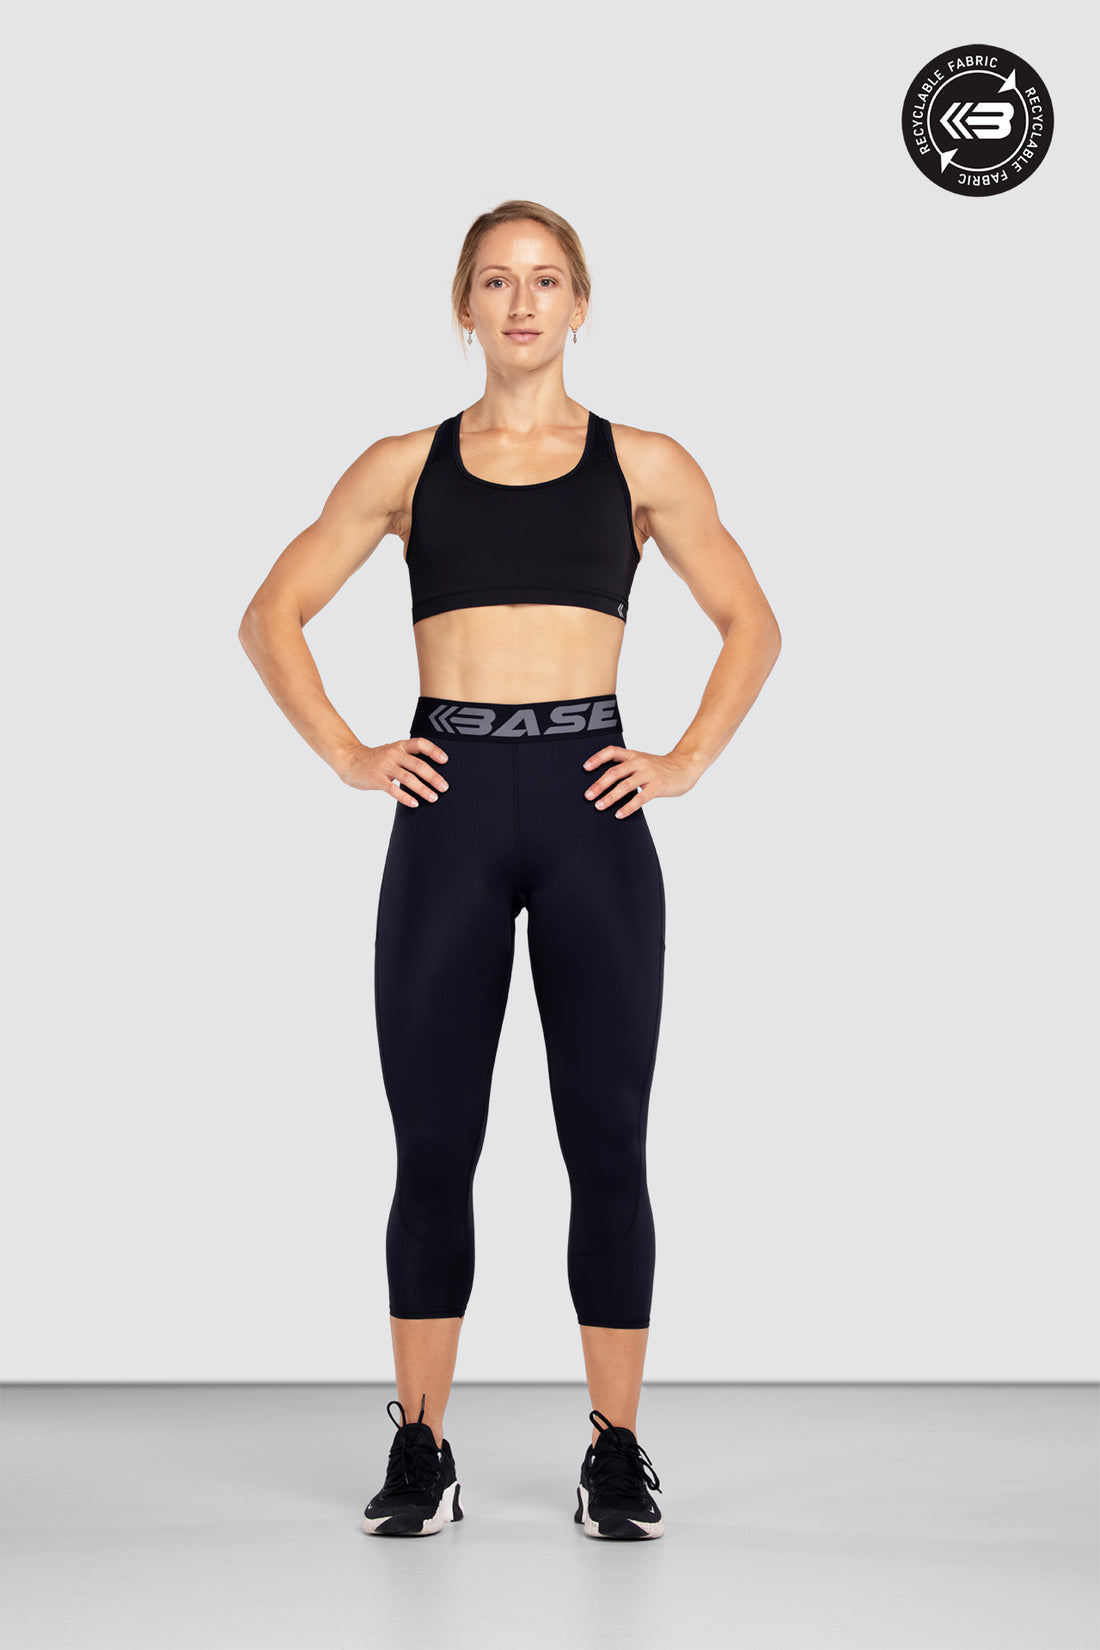 All Womens Compression Tights, T-shirts, Accessories